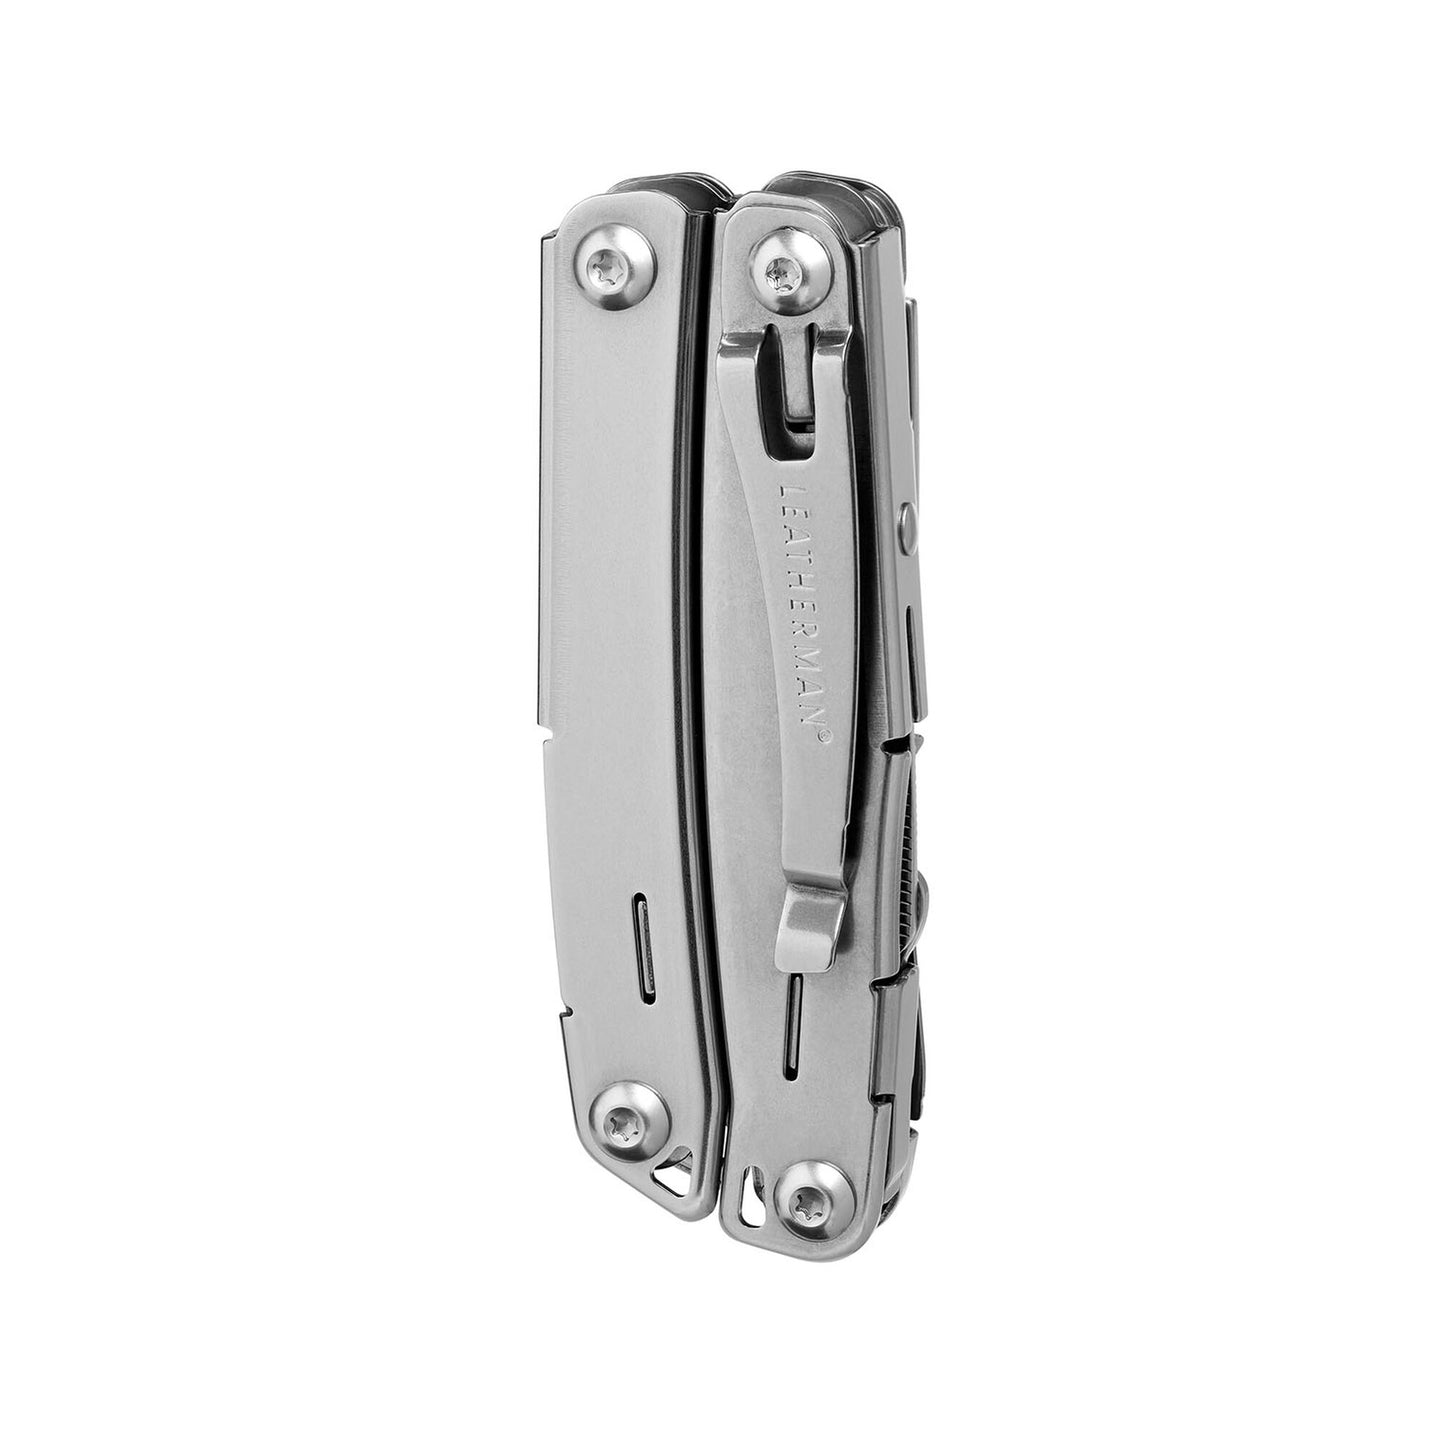 Pince Leatherman multifonctions Sidekick (14 outils) - Leatherman-T.A DEFENSE